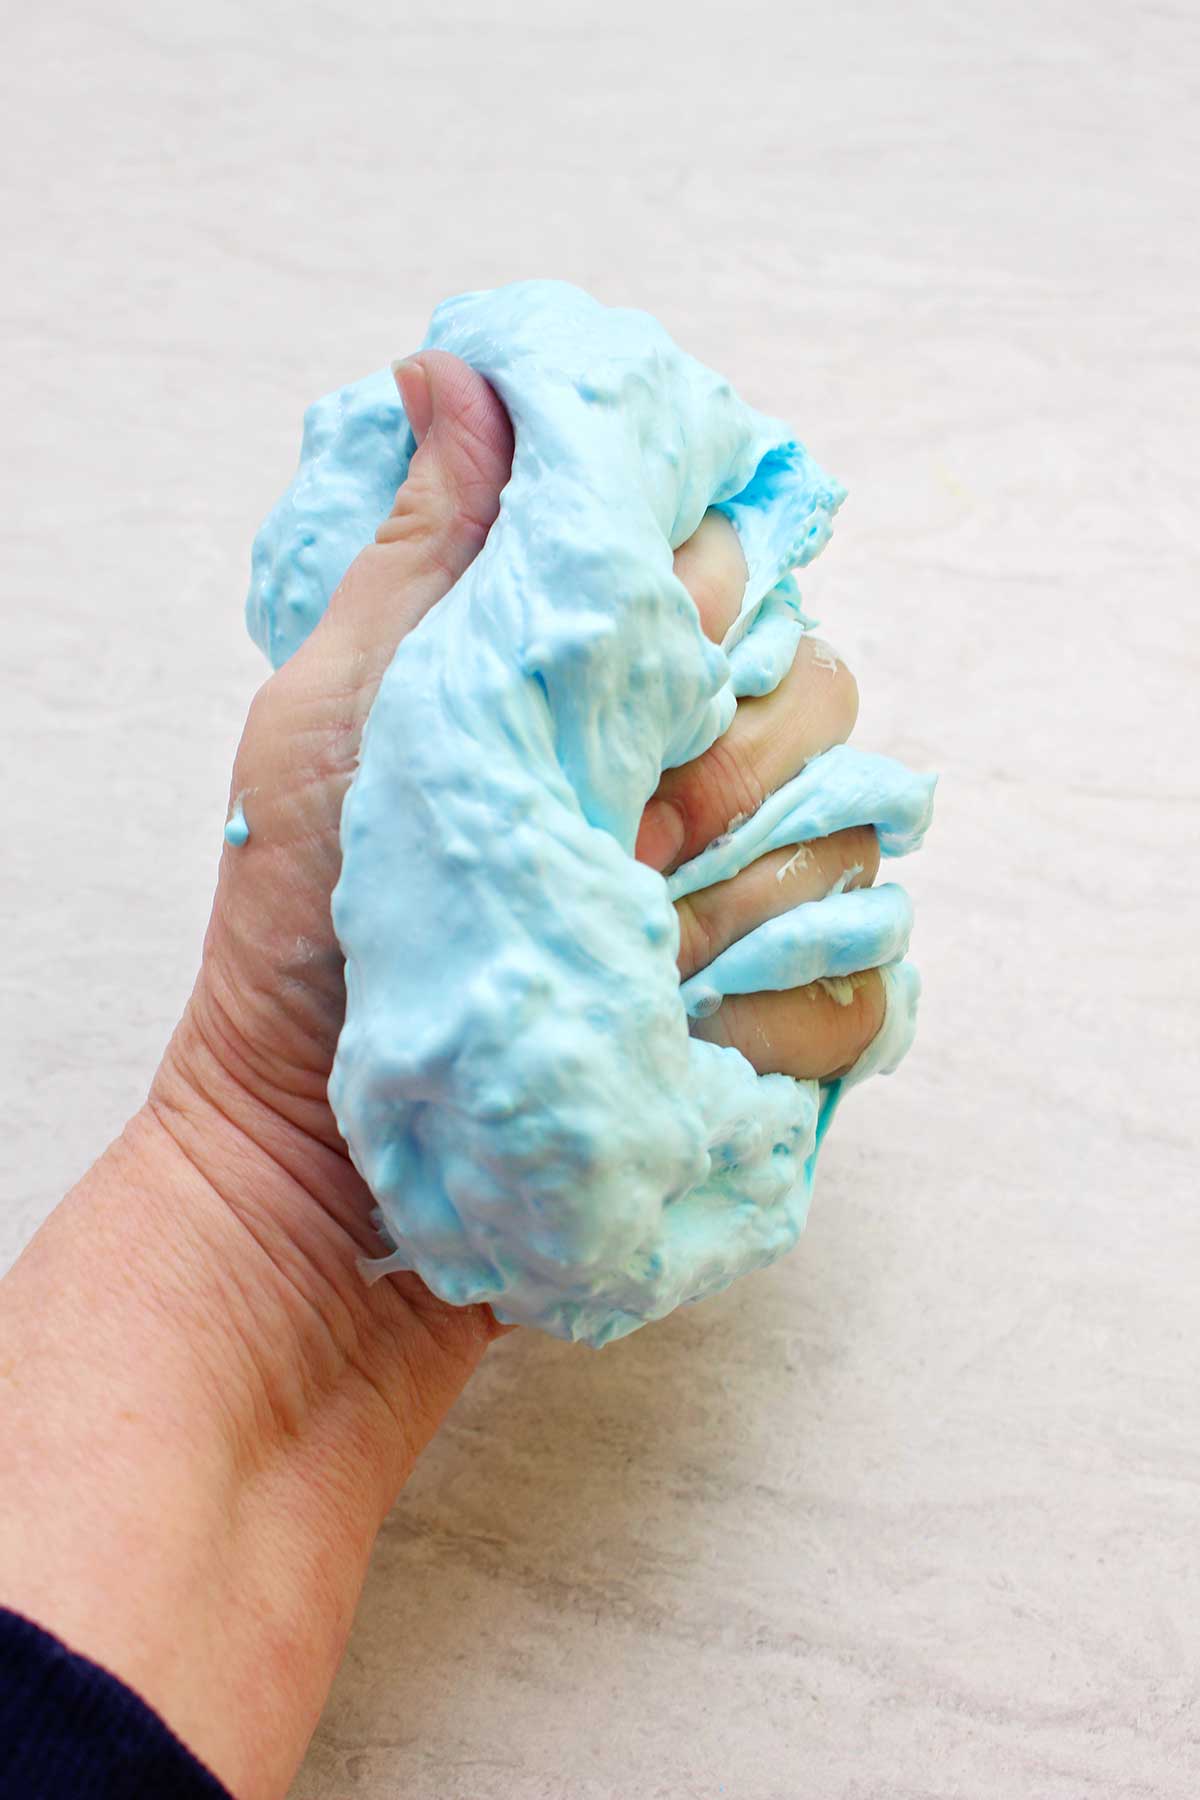 Fluffy Slime Recipe Without Borax - It's SO FLUFFY!!!